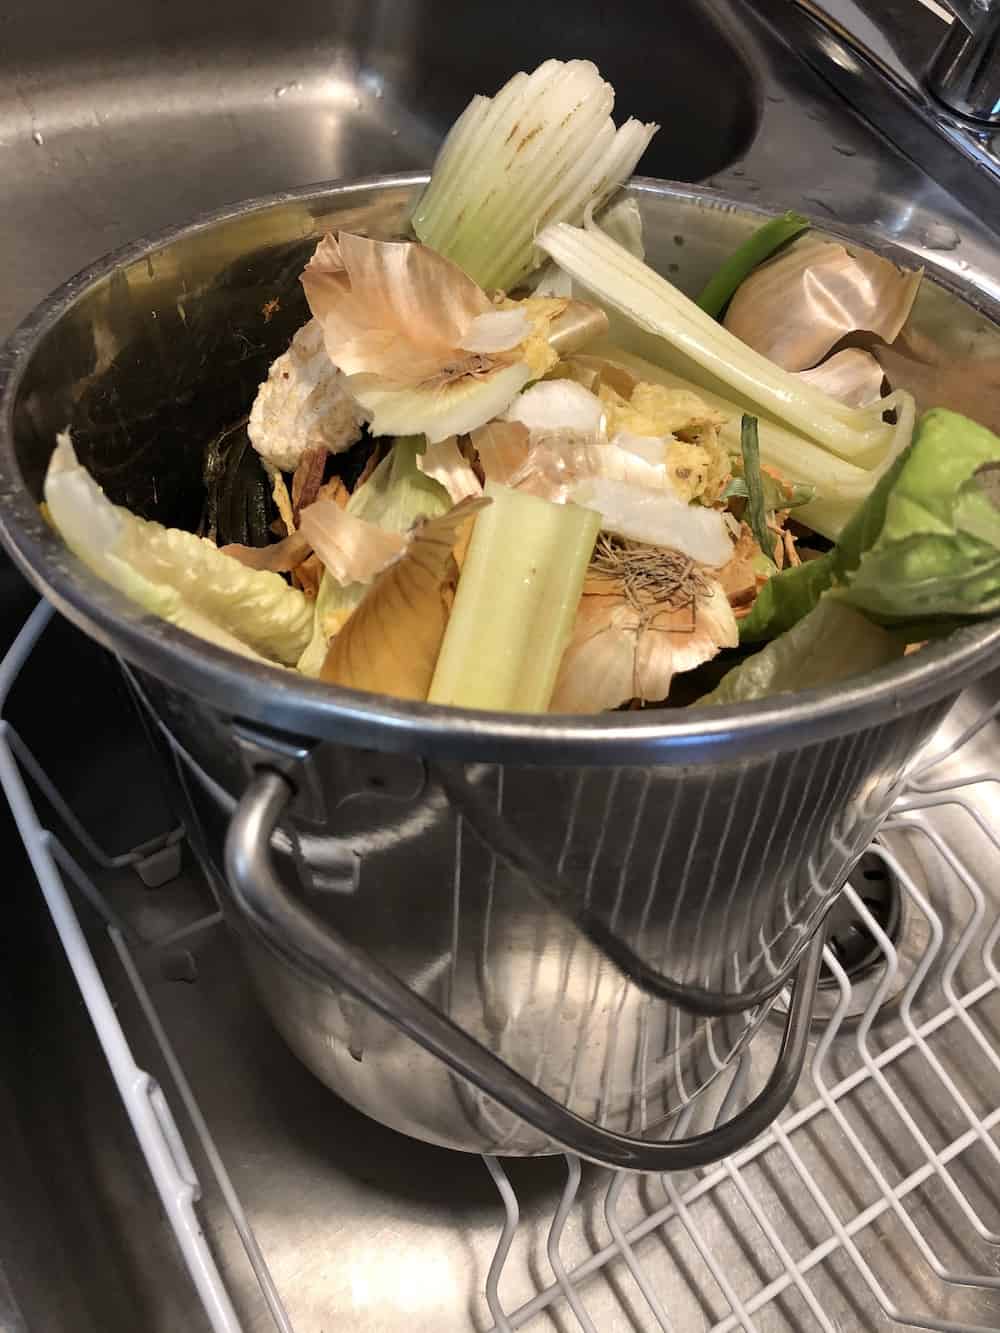 Food scraps - metal compost bucket for composting at home